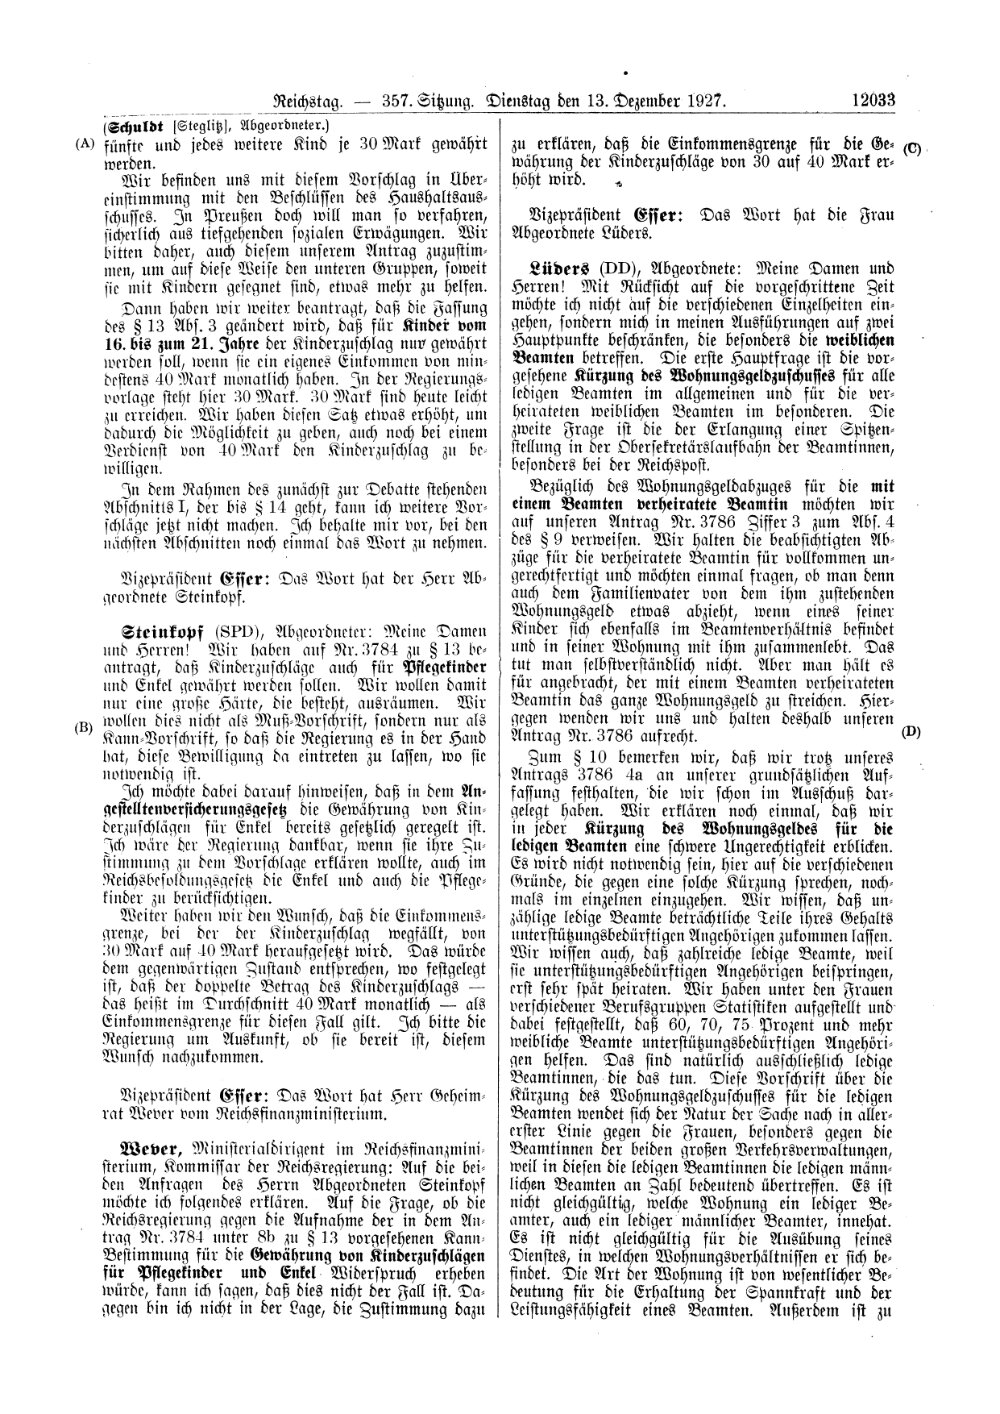 Scan of page 12033